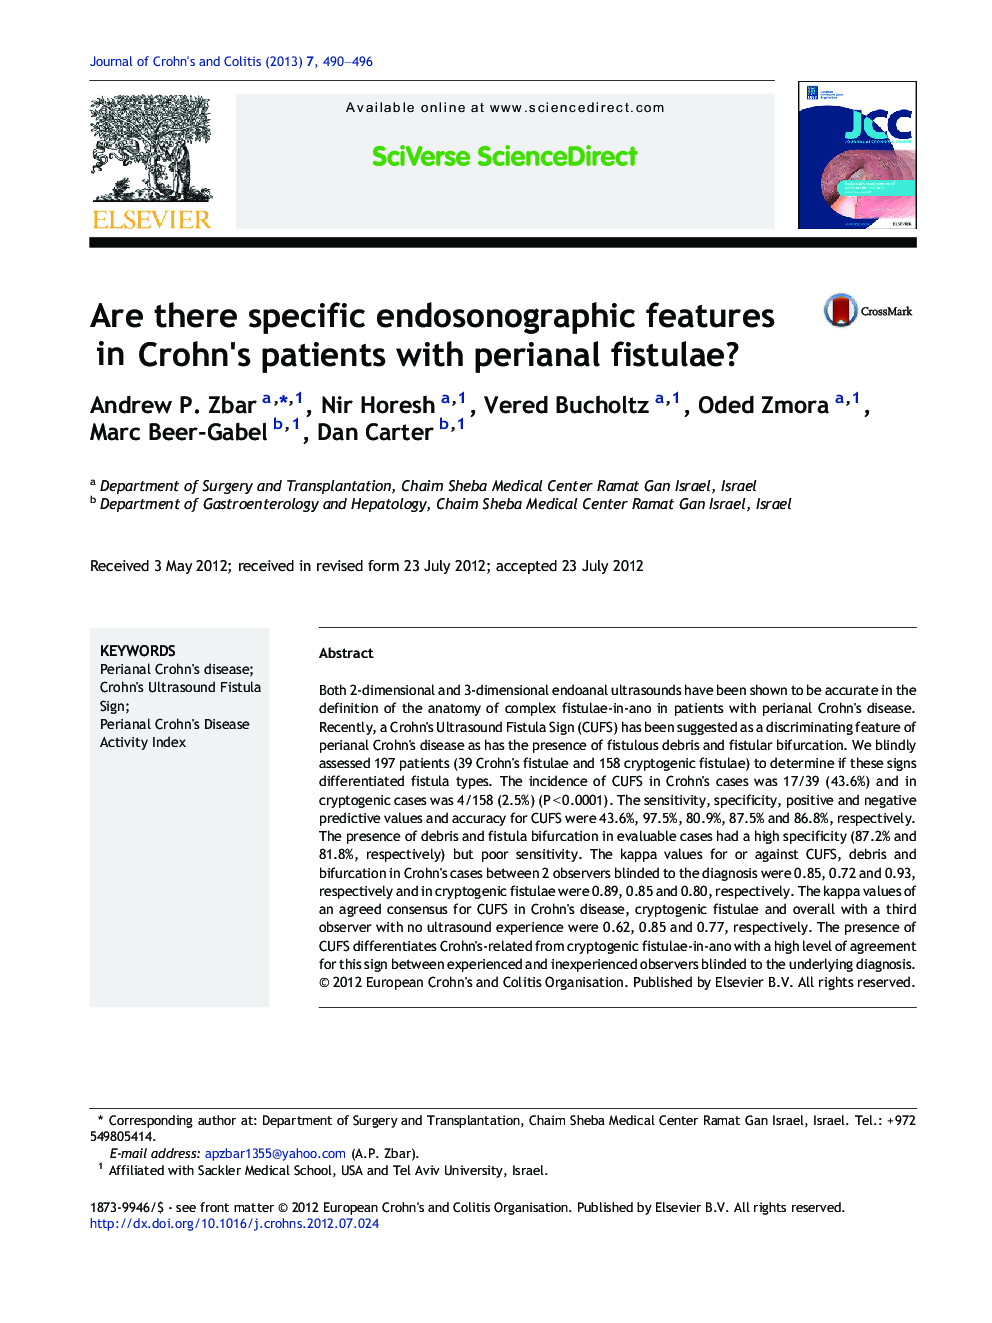 Are there specific endosonographic features in Crohn's patients with perianal fistulae?